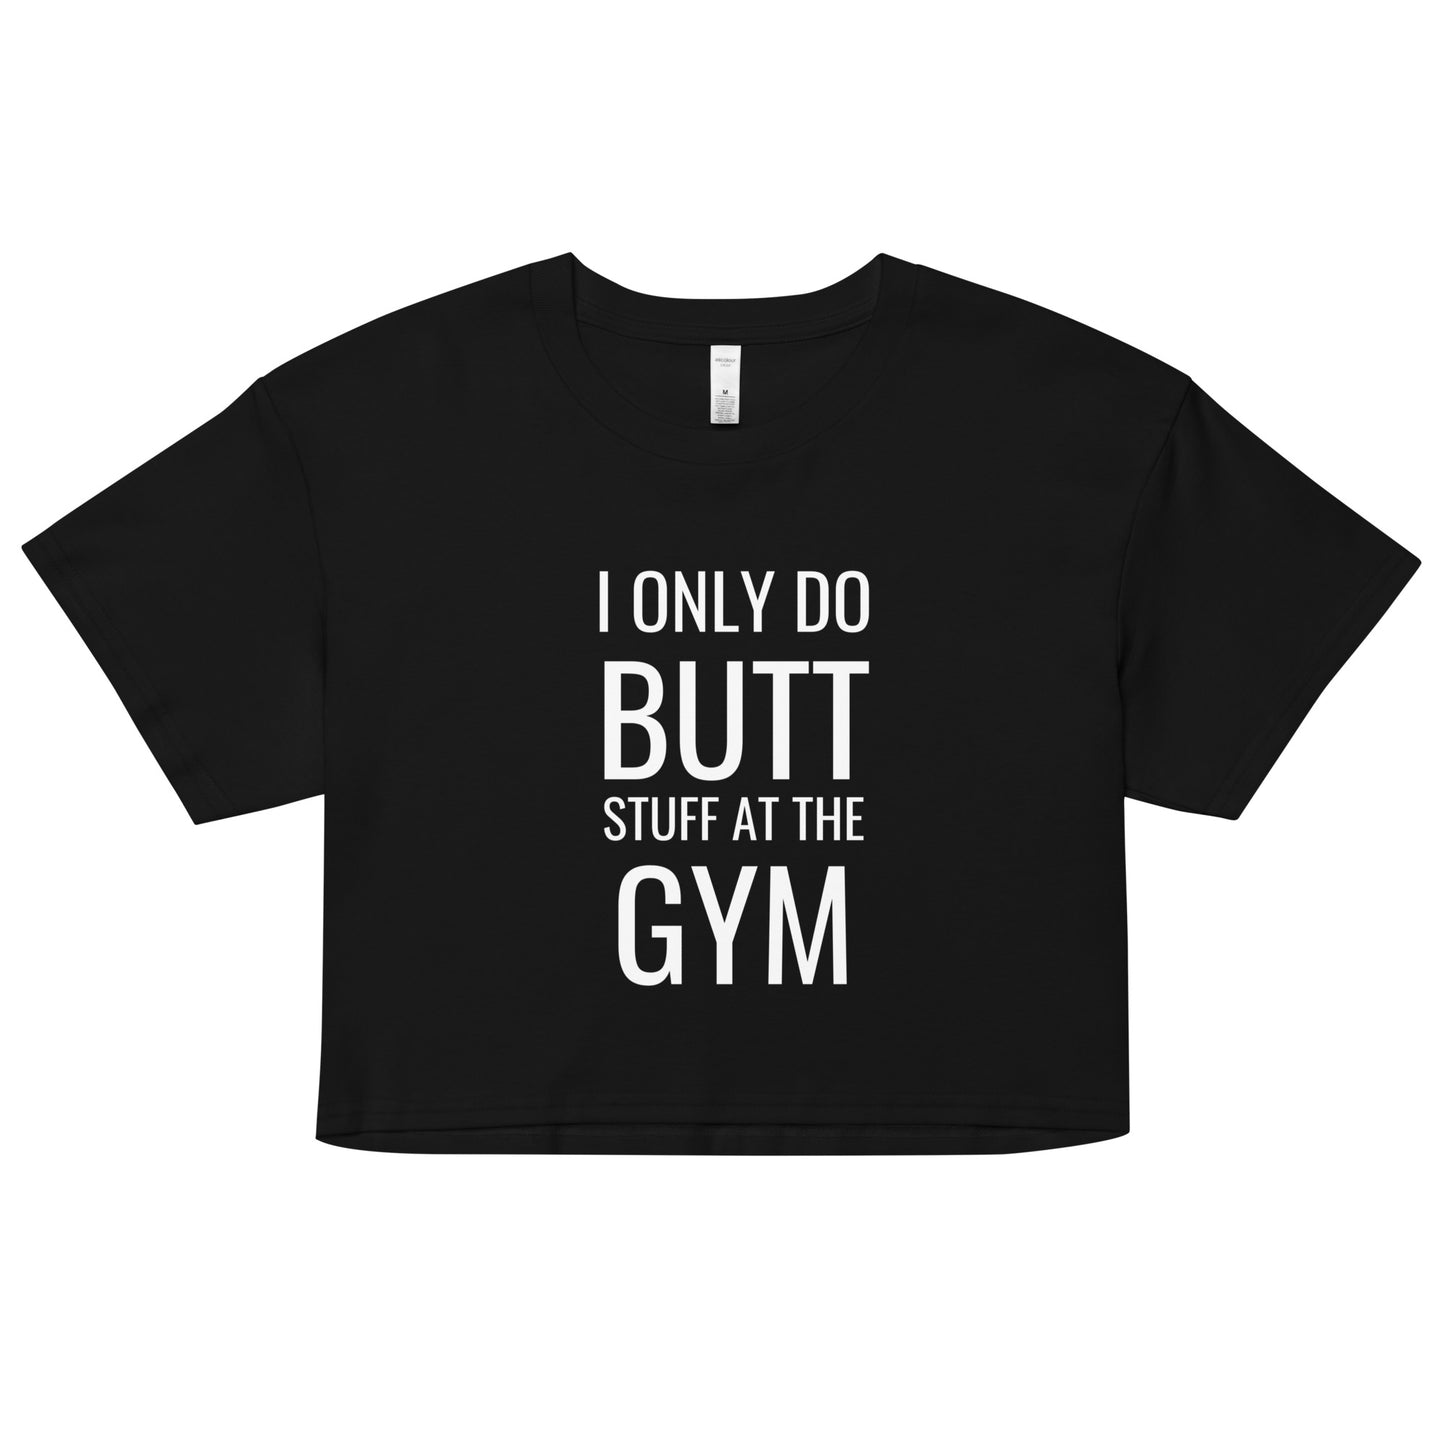 I ONLY DO BUTT STUFF AT THE GYM Crop Top